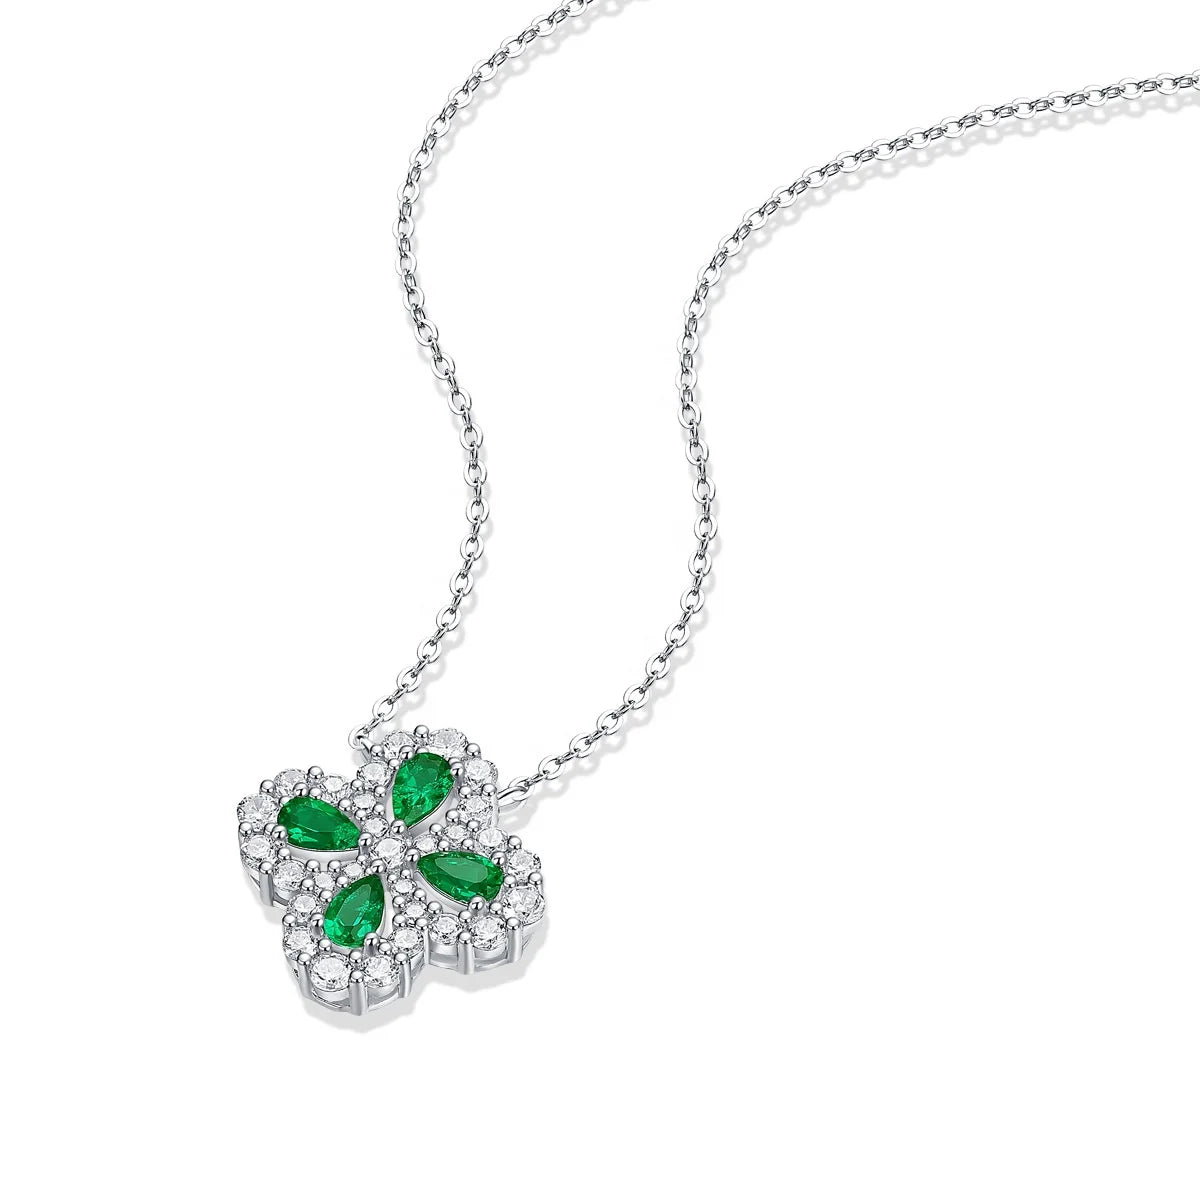 3*4mm Emerald Clover Pendant/Necklace in 18k White Gold-Plated 925 Sterling Silver